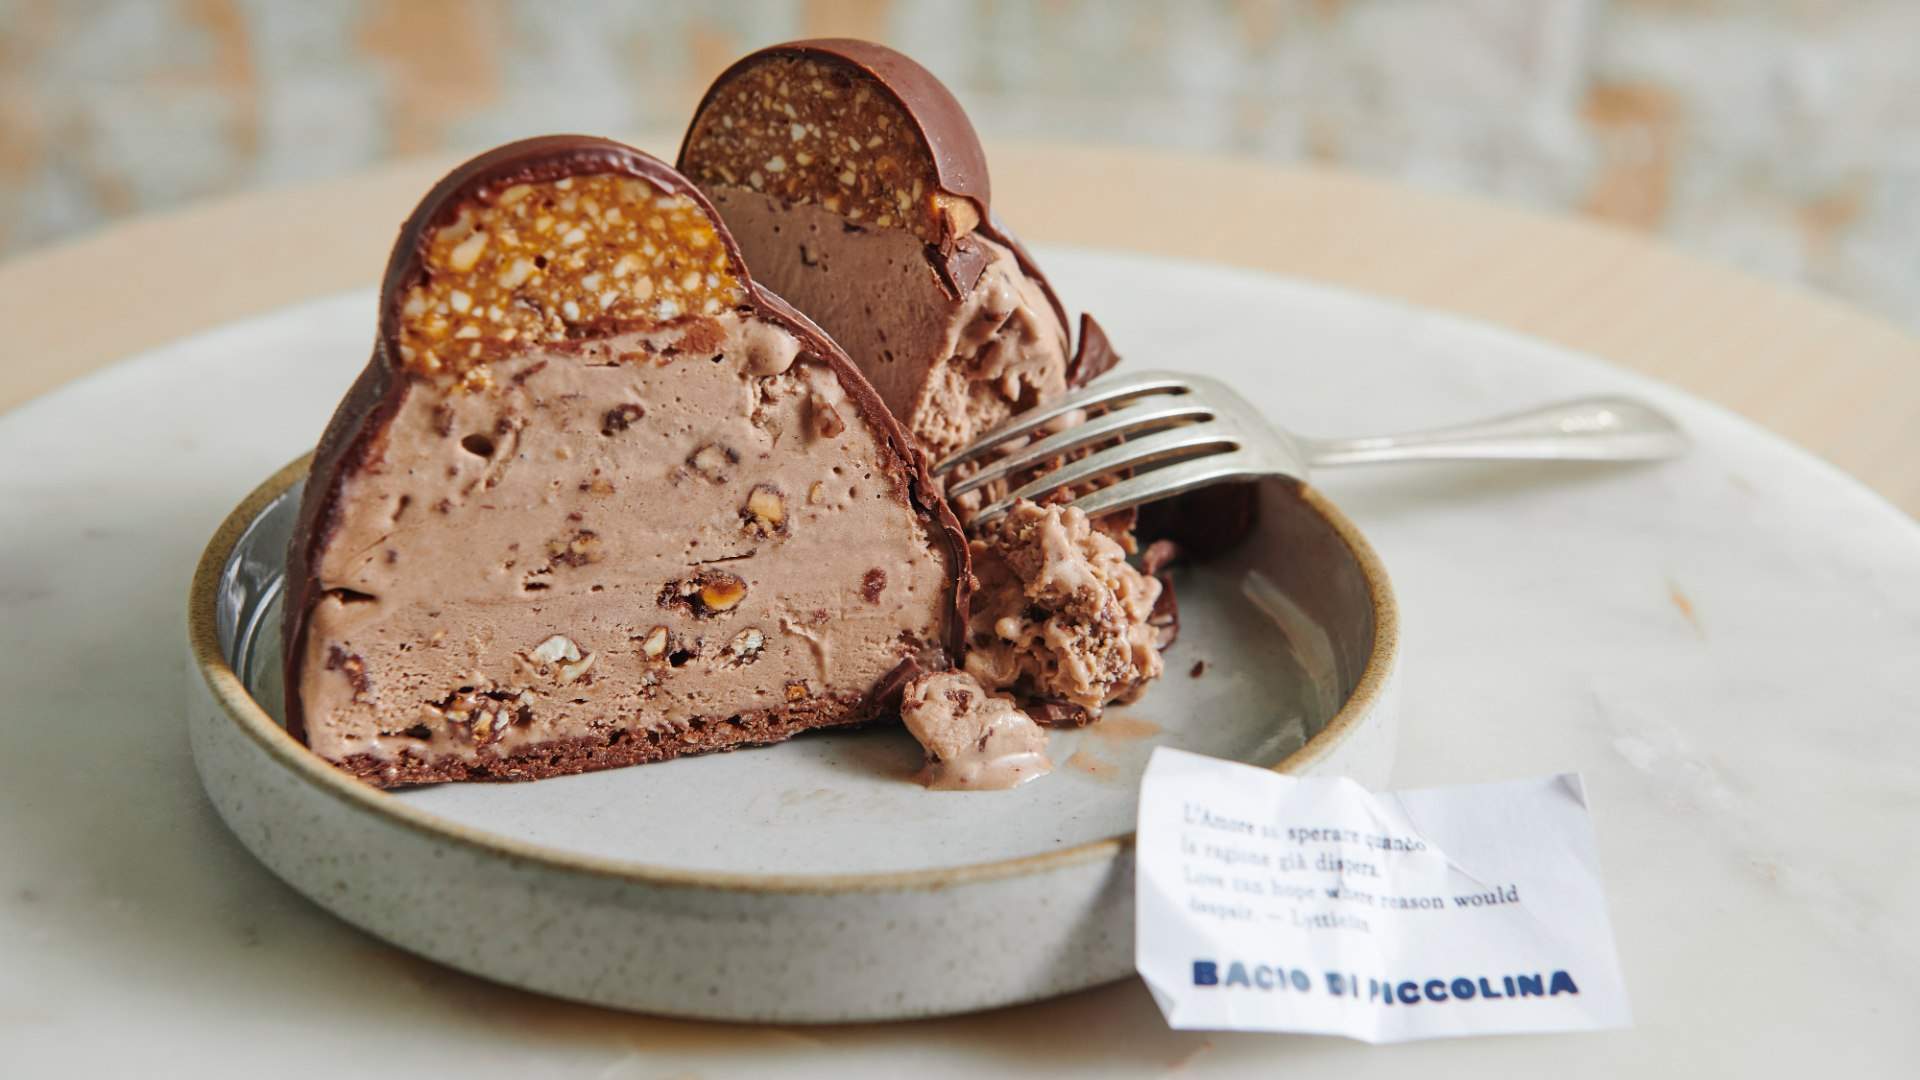 Piccolina's Giant Baci Gelato Cake Will Help You Melt Hearts This Valentine's Day